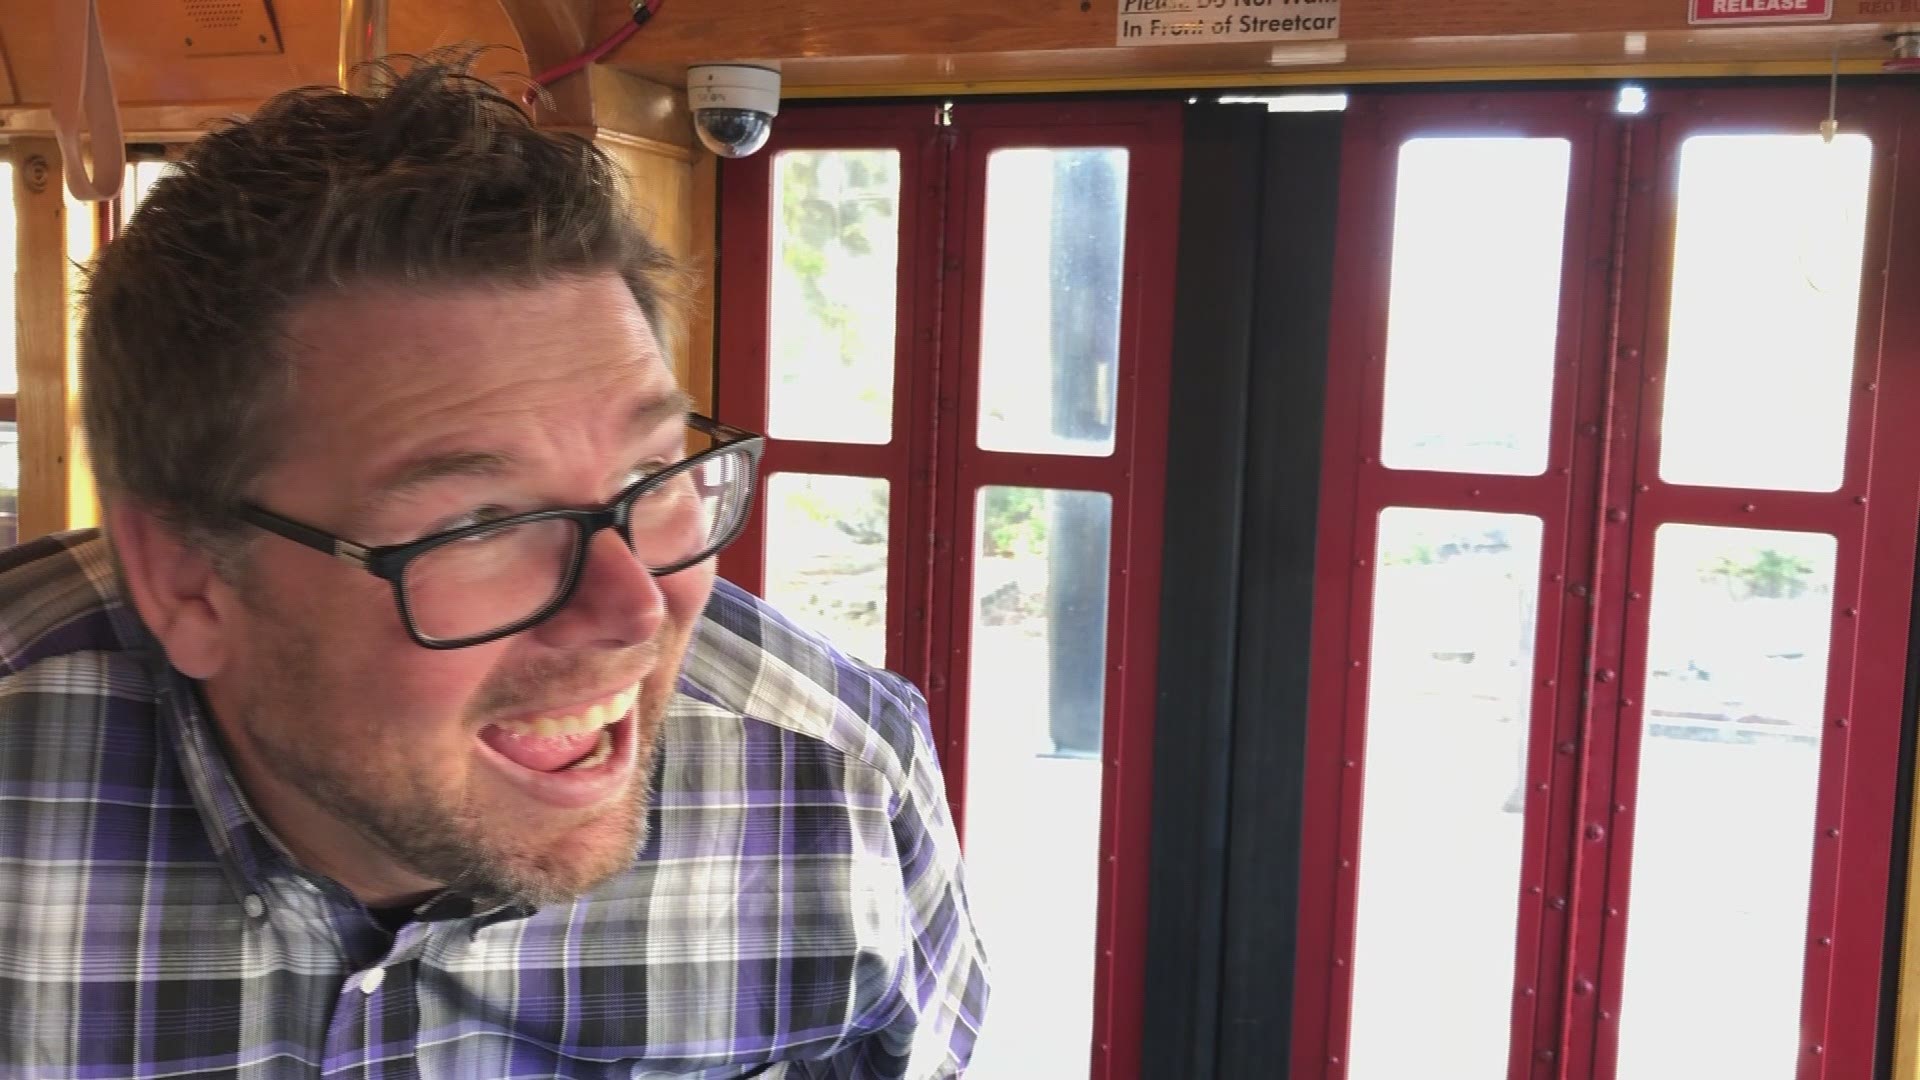 Mariel Ruiz and Adam Bledsoe are back with another Discover Arkansas; this time they're checking out the streetcars in downtown Little Rock and North Little Rock.